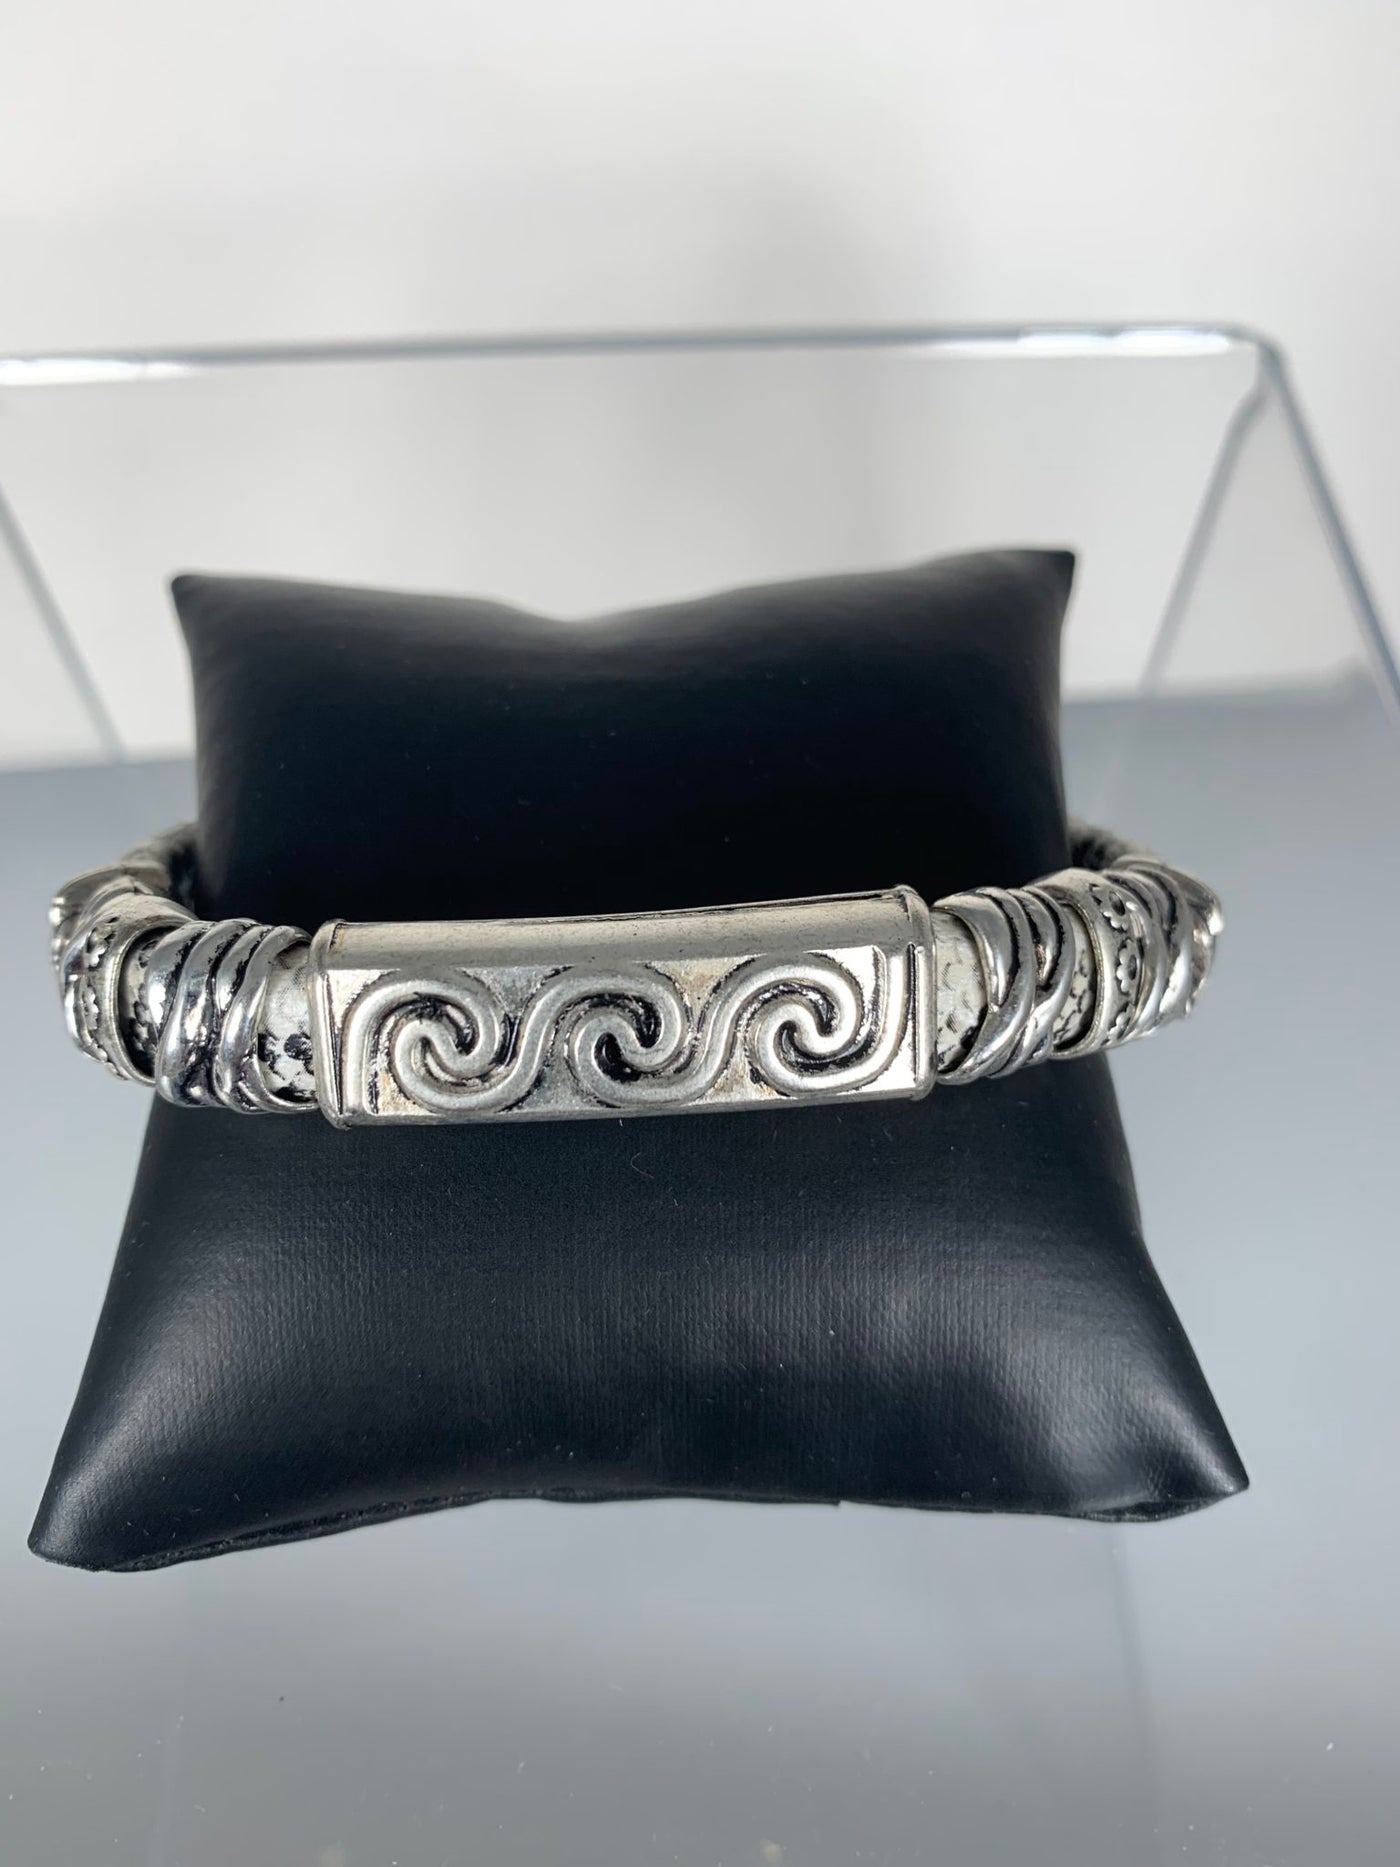 White Faux Snake Skin Band Bracelet Featuring Waves